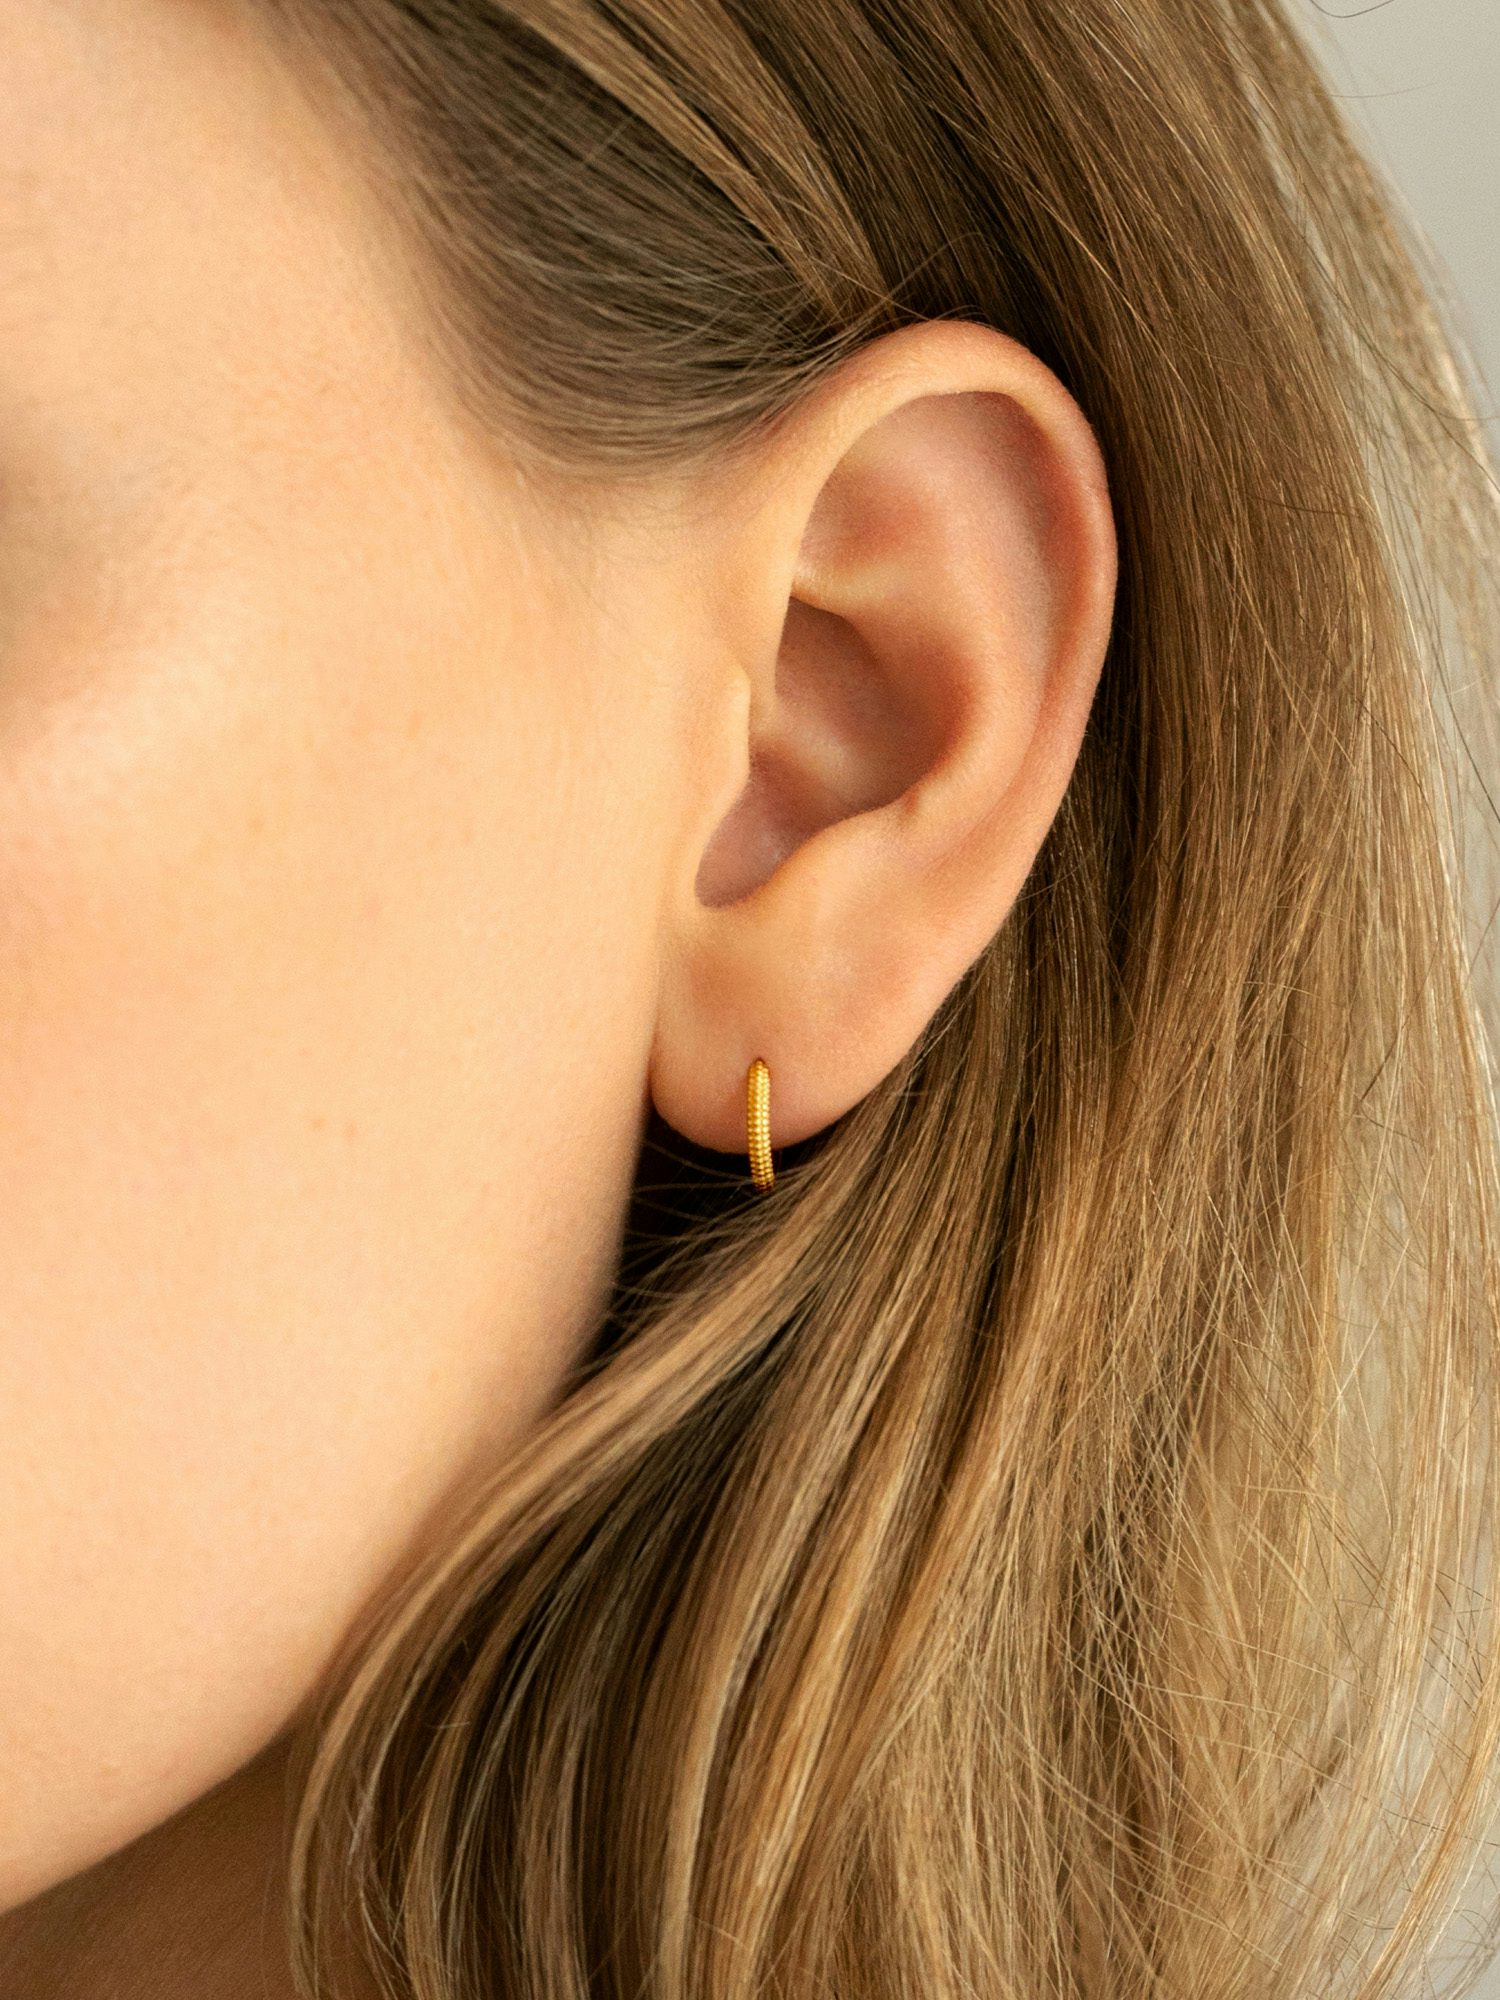 Anagramme earrings millegrains in 18k Fairmined ethical yellow gold